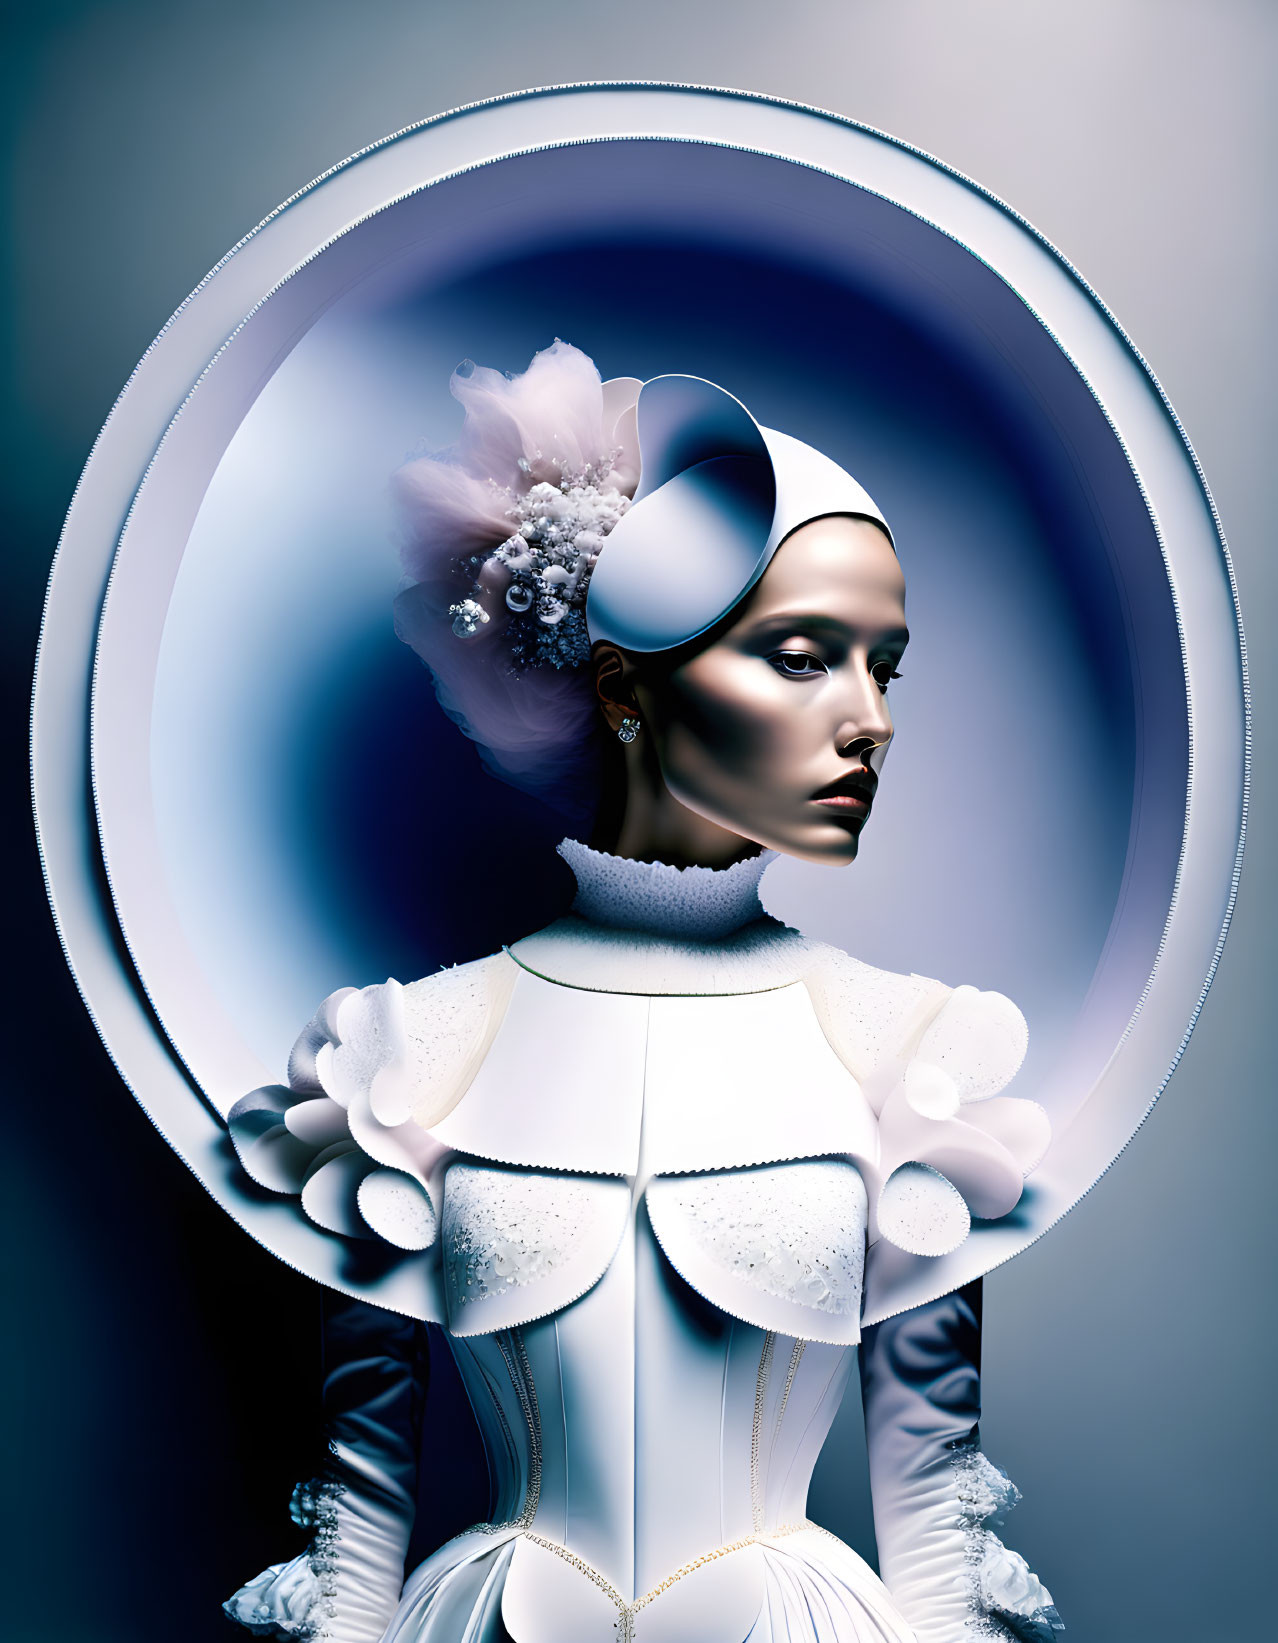 Elaborate white costume with exaggerated shoulders and circular headpiece on futuristic woman